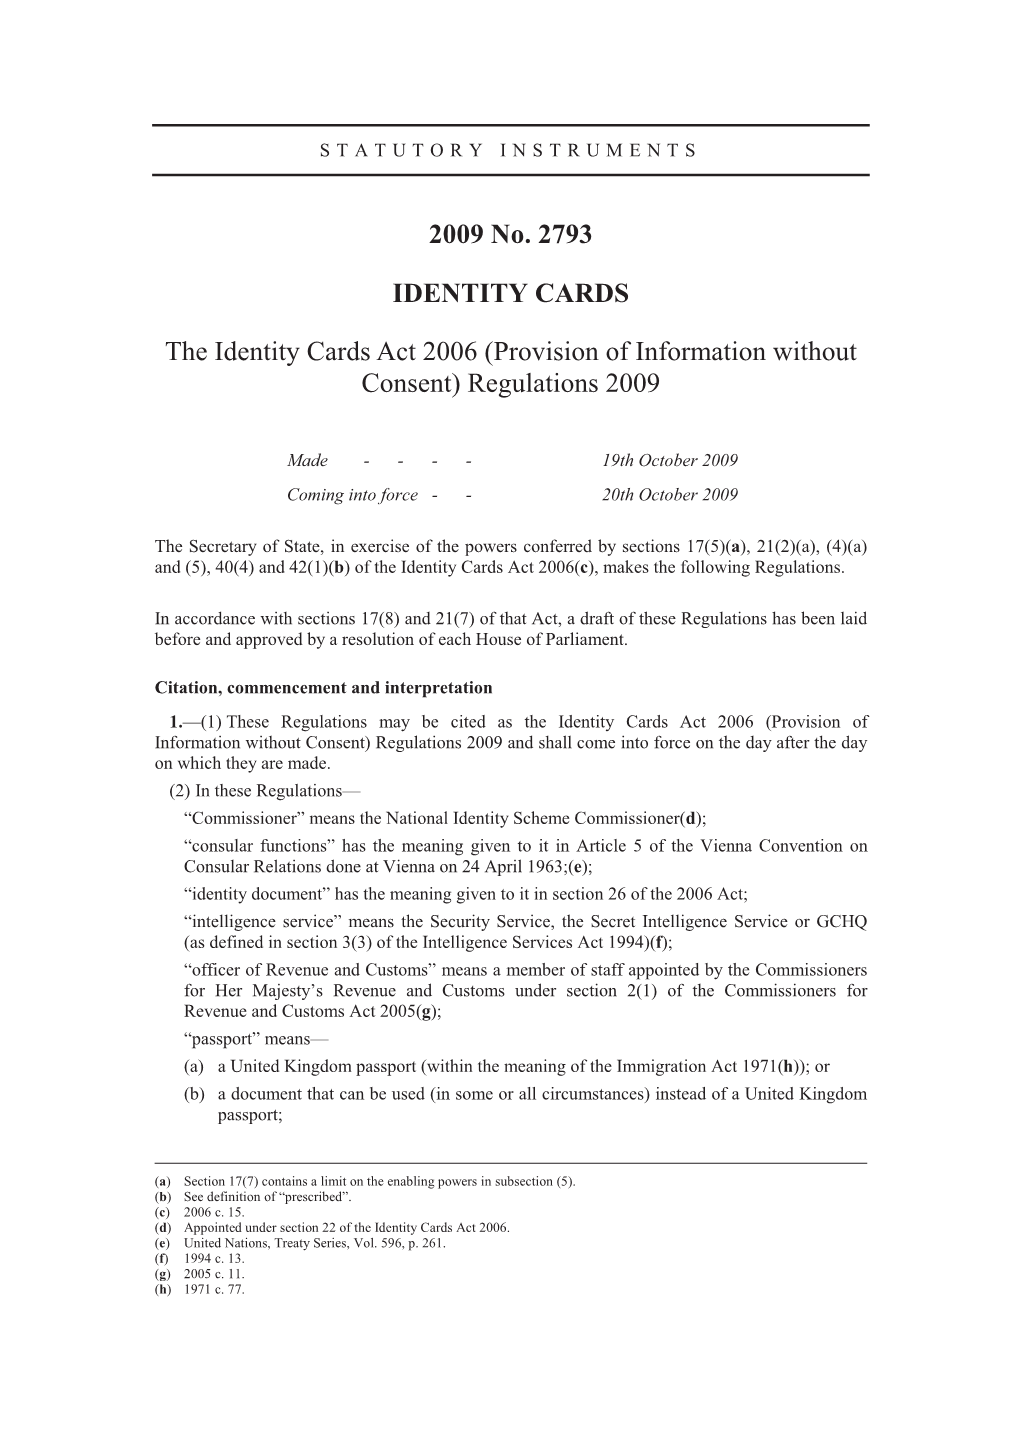 2009 No. 2793 IDENTITY CARDS the Identity Cards Act 2006